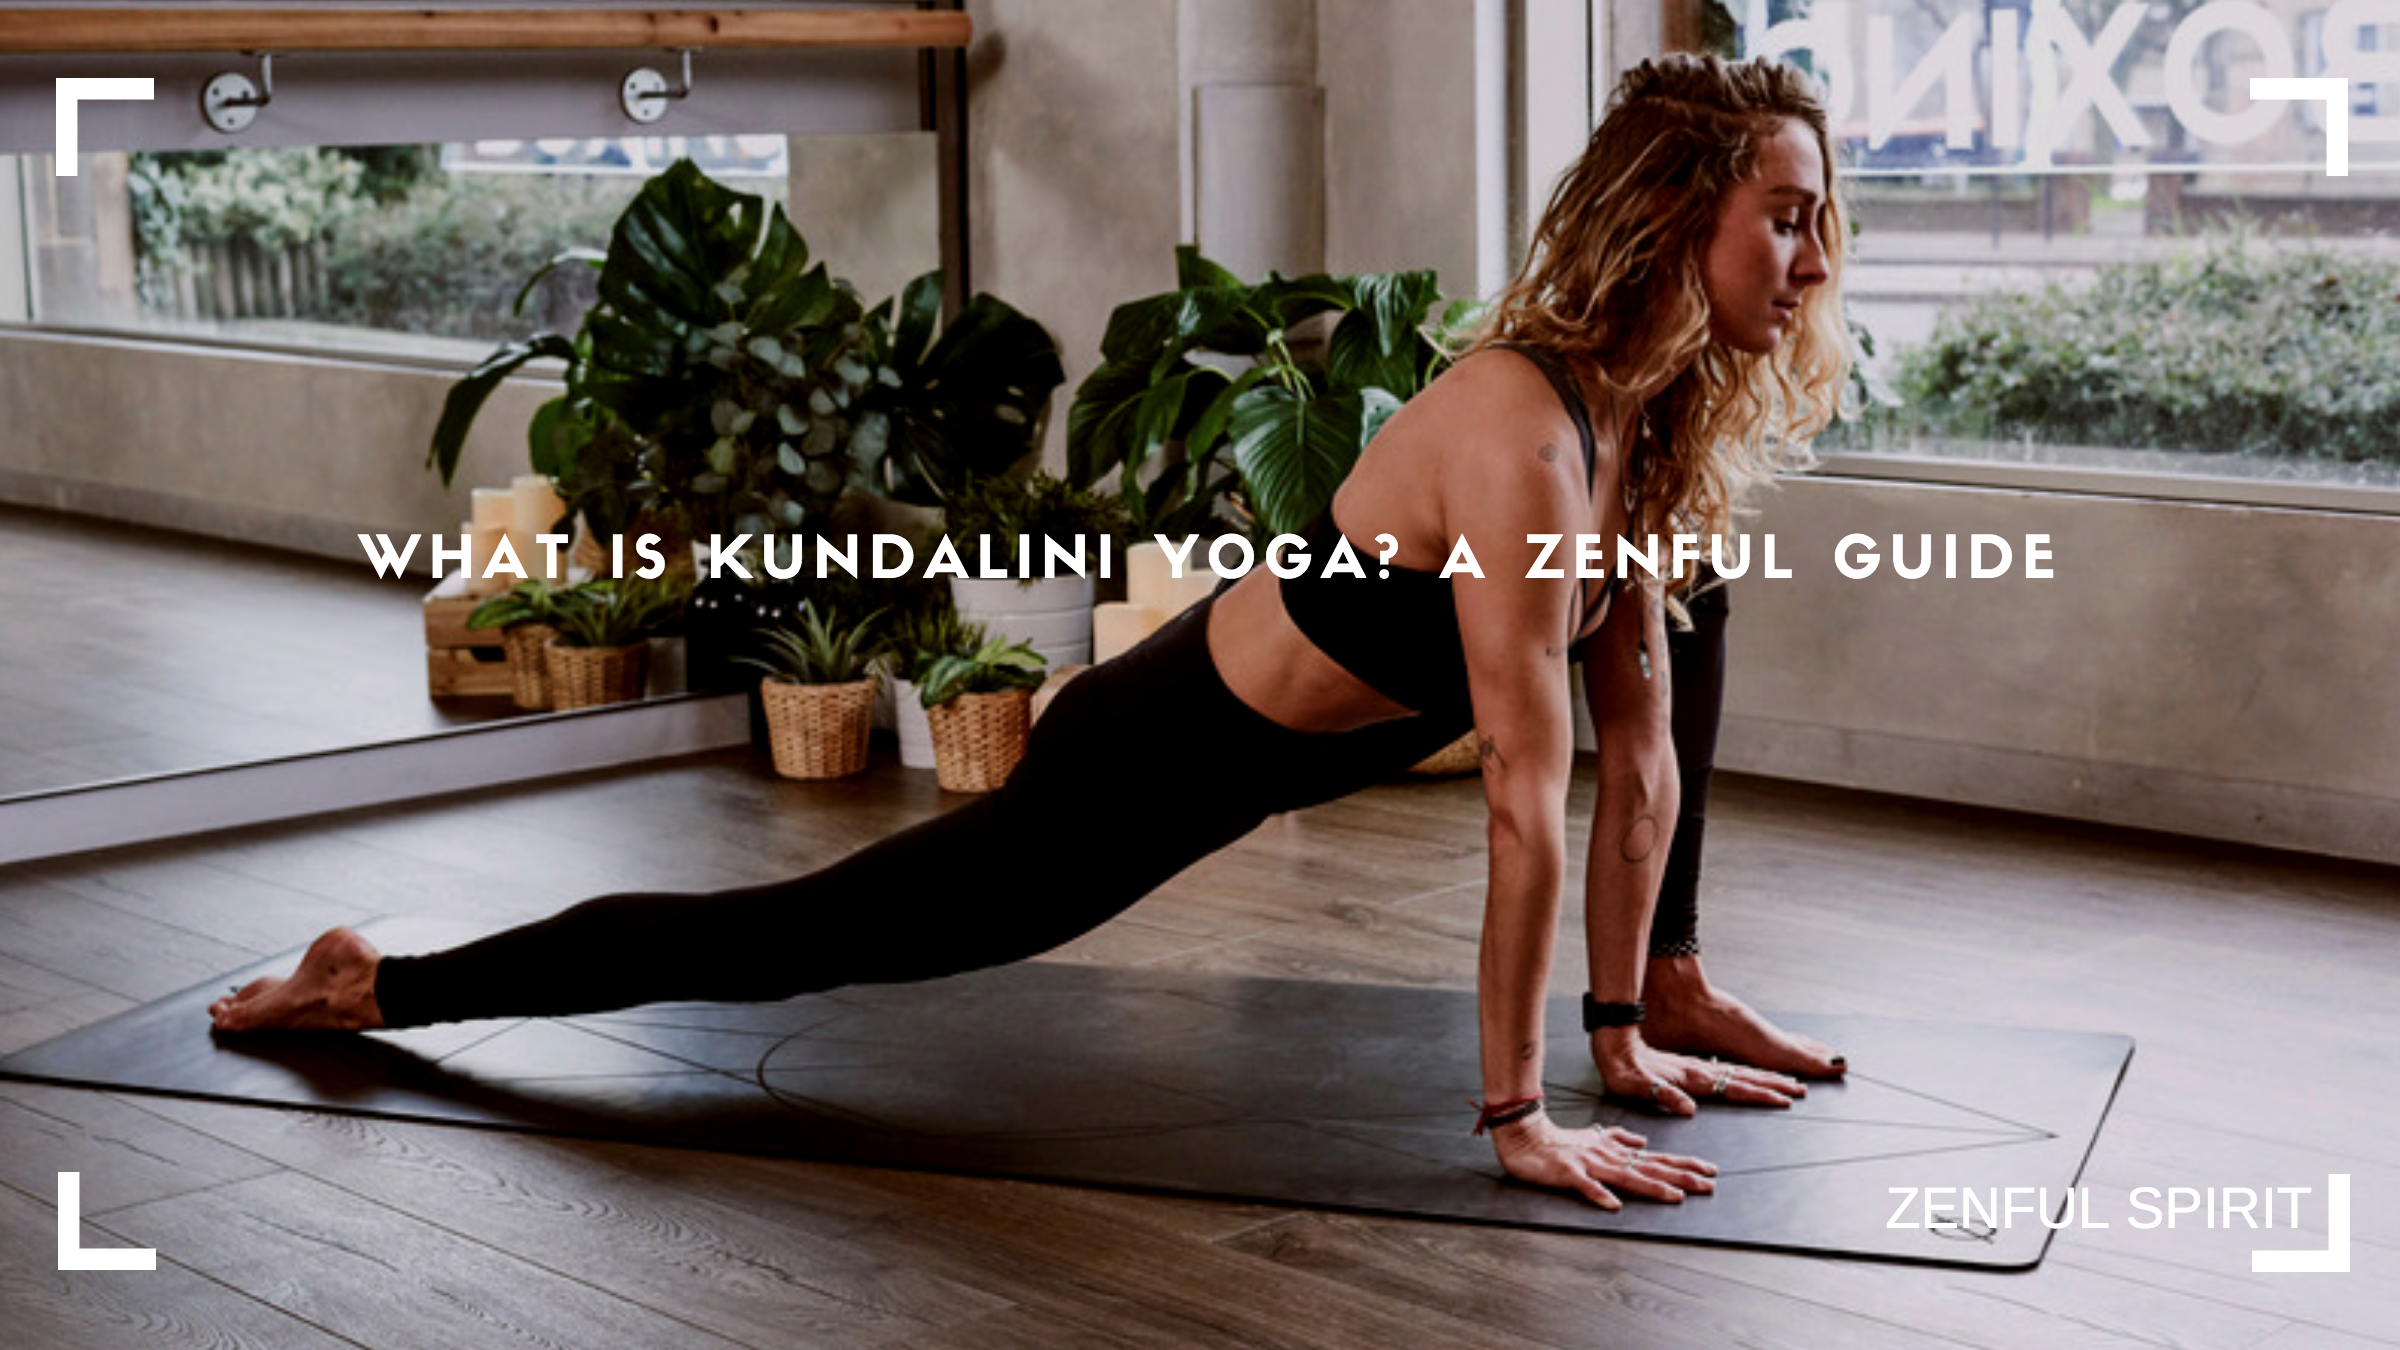 What is Kundalini Yoga? A Zenful Guide